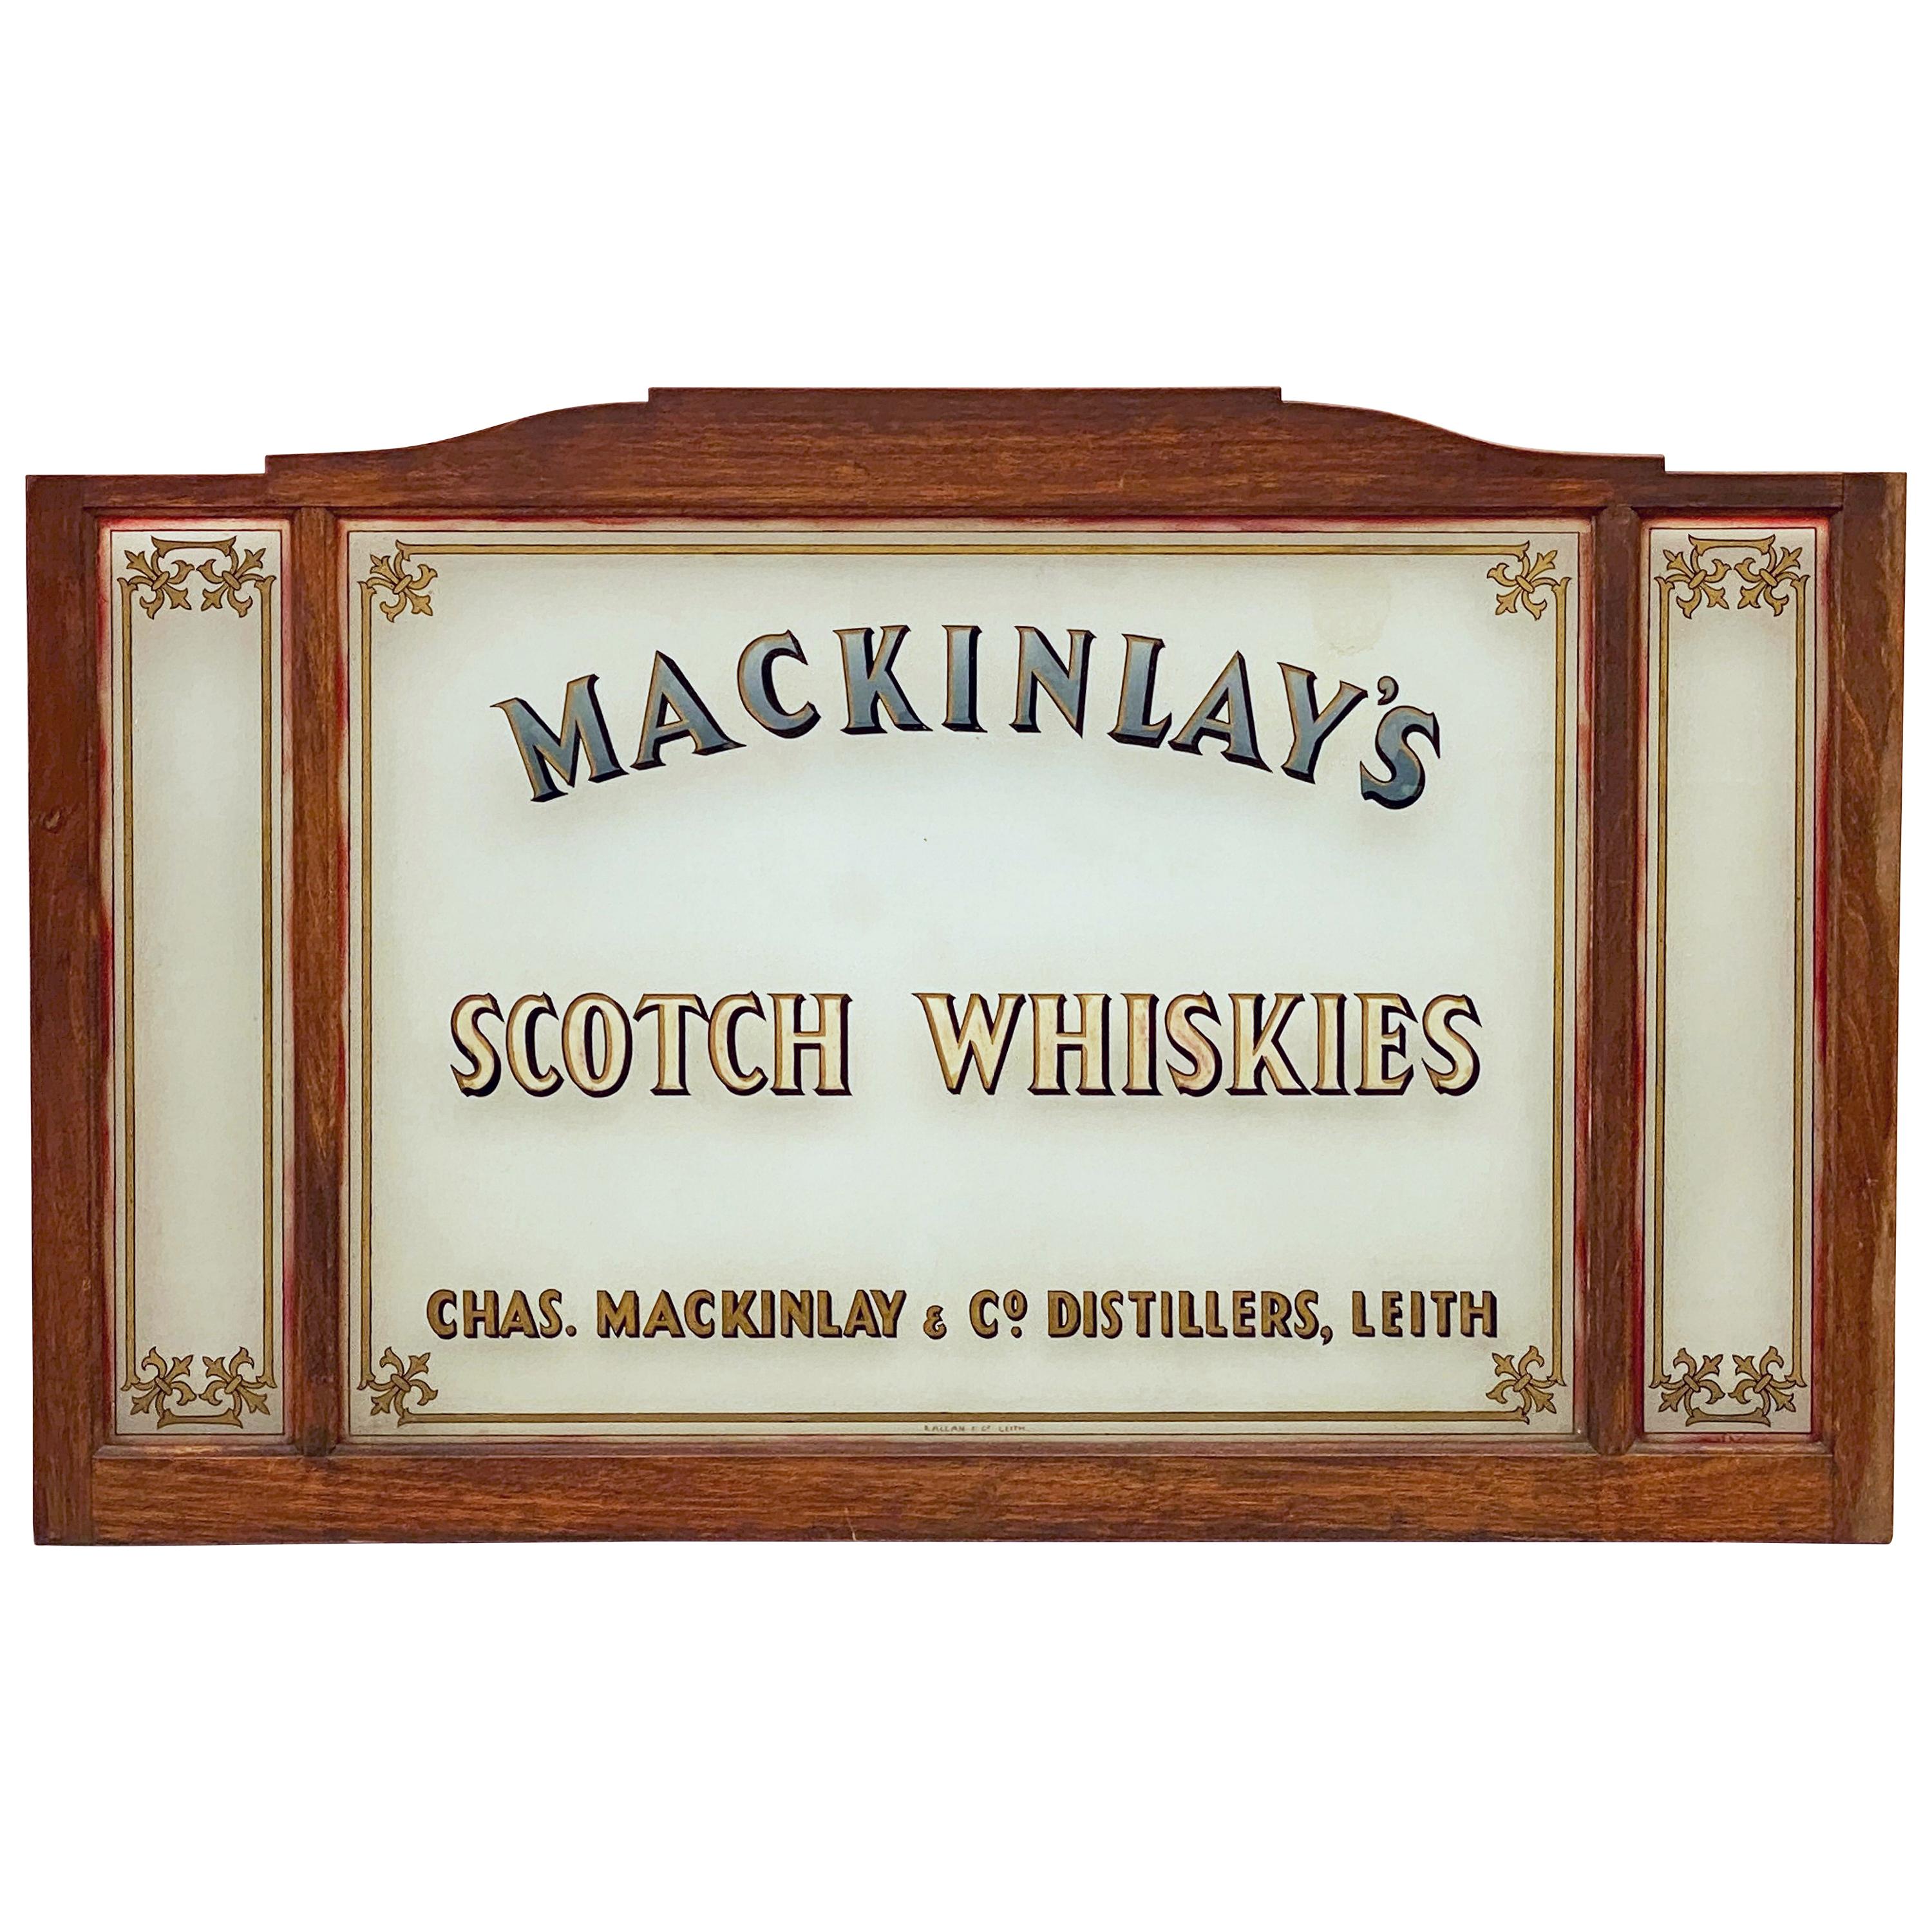 Large Scottish Pub Sign "Mackinlay's Scotch Whiskies" of Wood and Glass